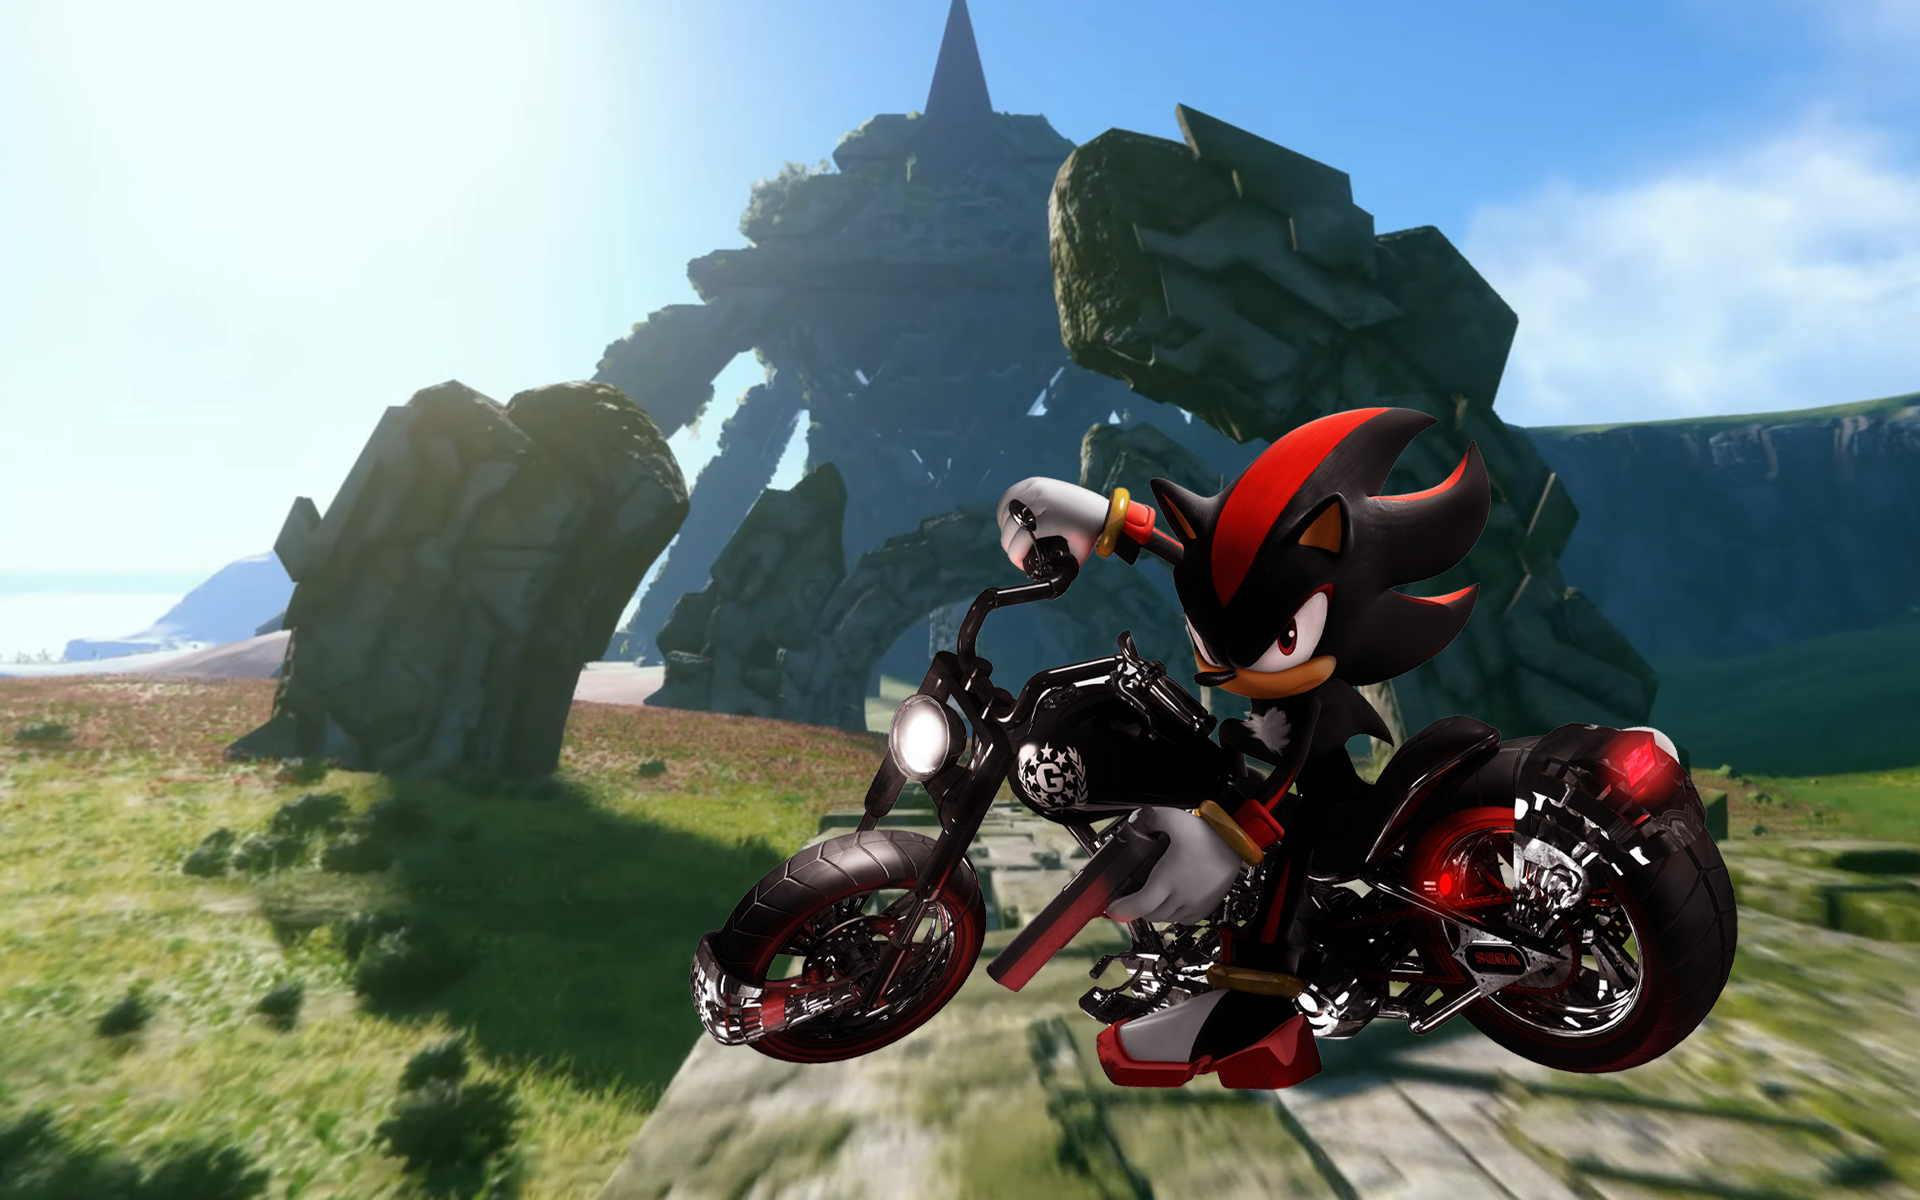 Shadow the Hedgehog could be coming to Sonic Frontiers, according